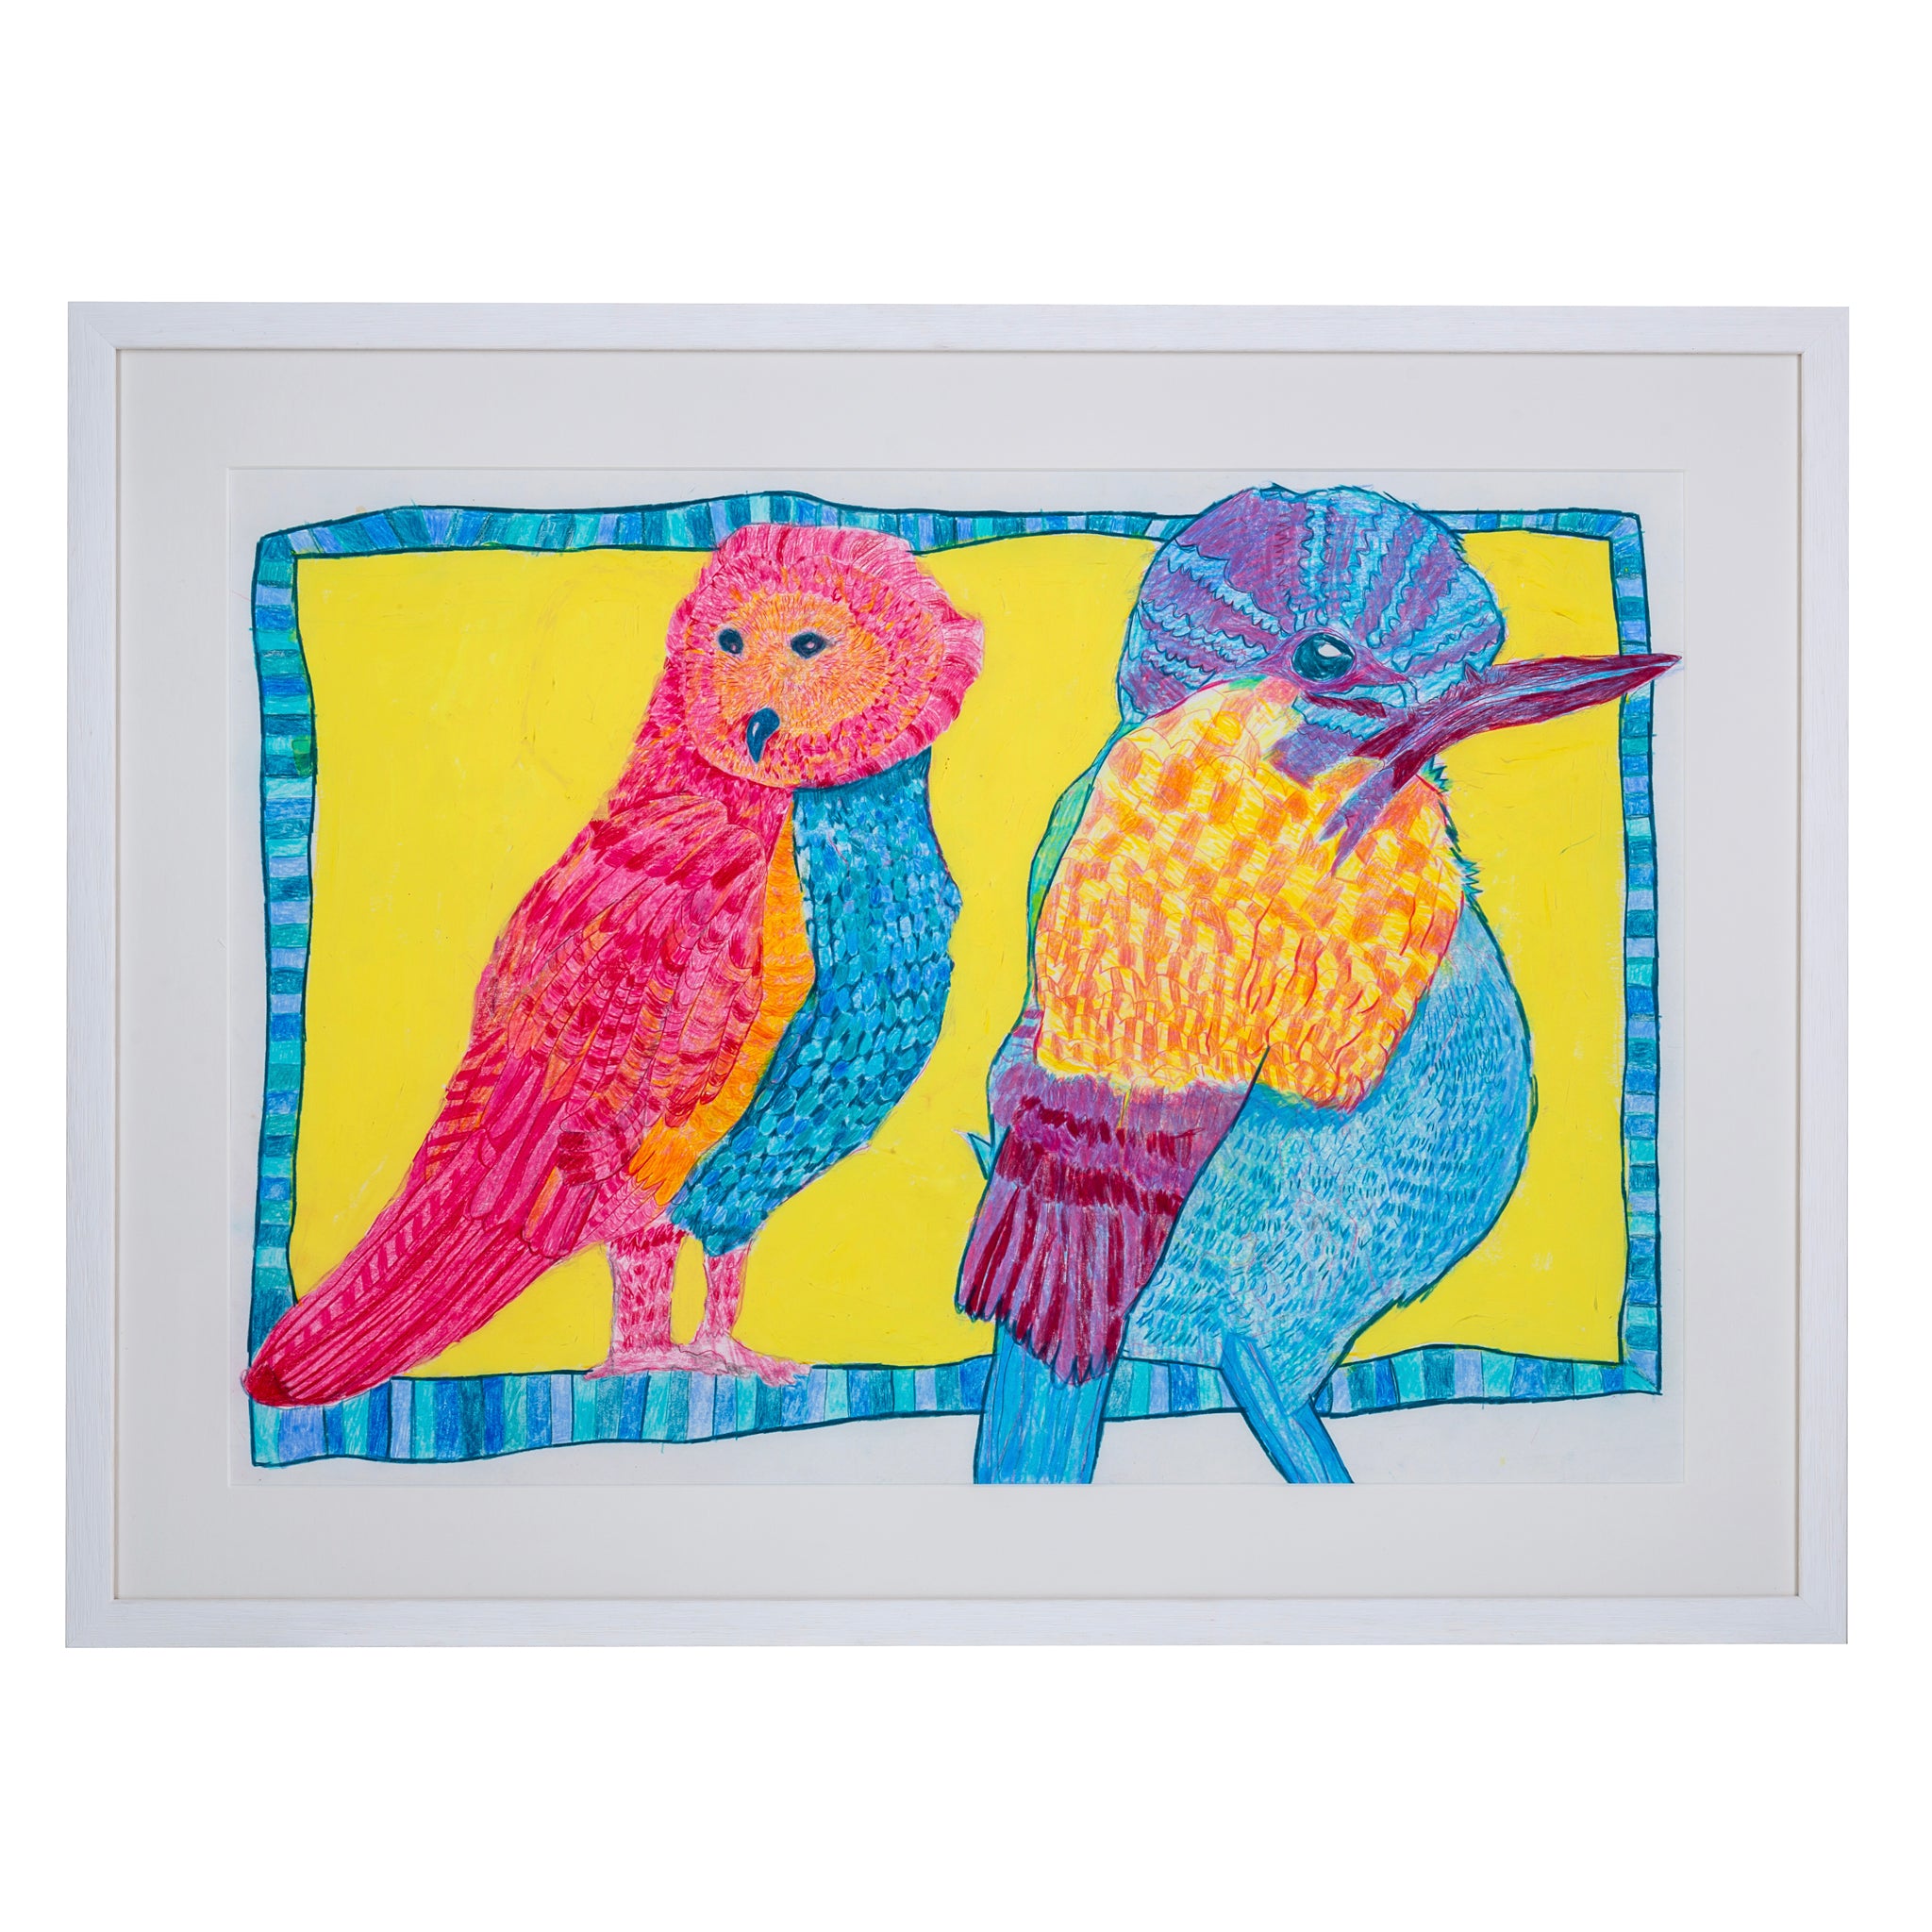 Framed drawing of two pink, yellow and blue birds 